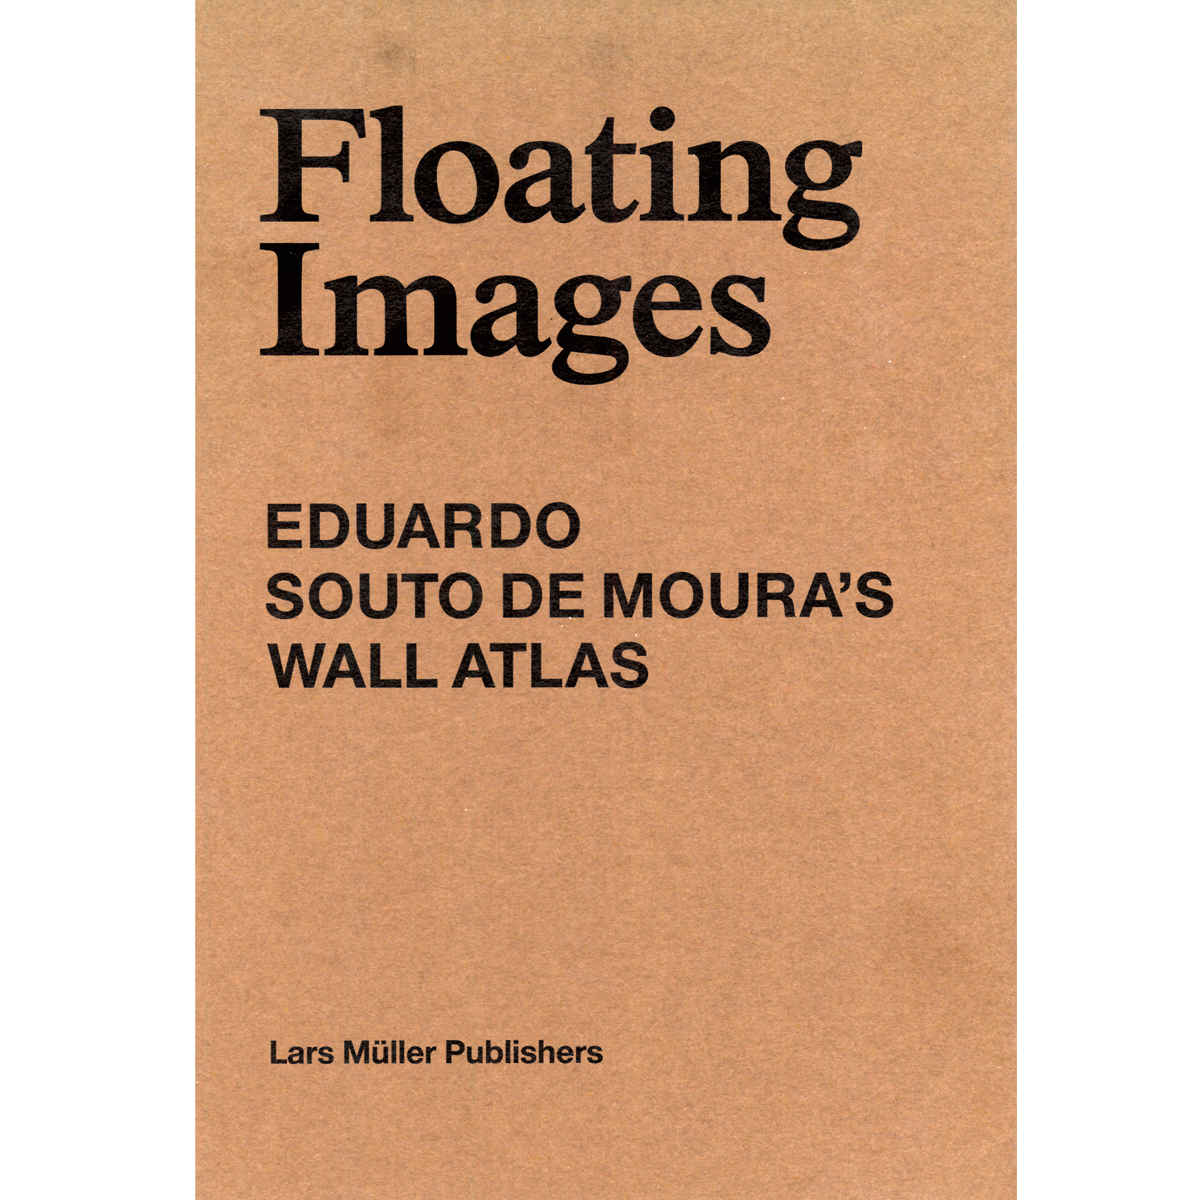 Floating Images